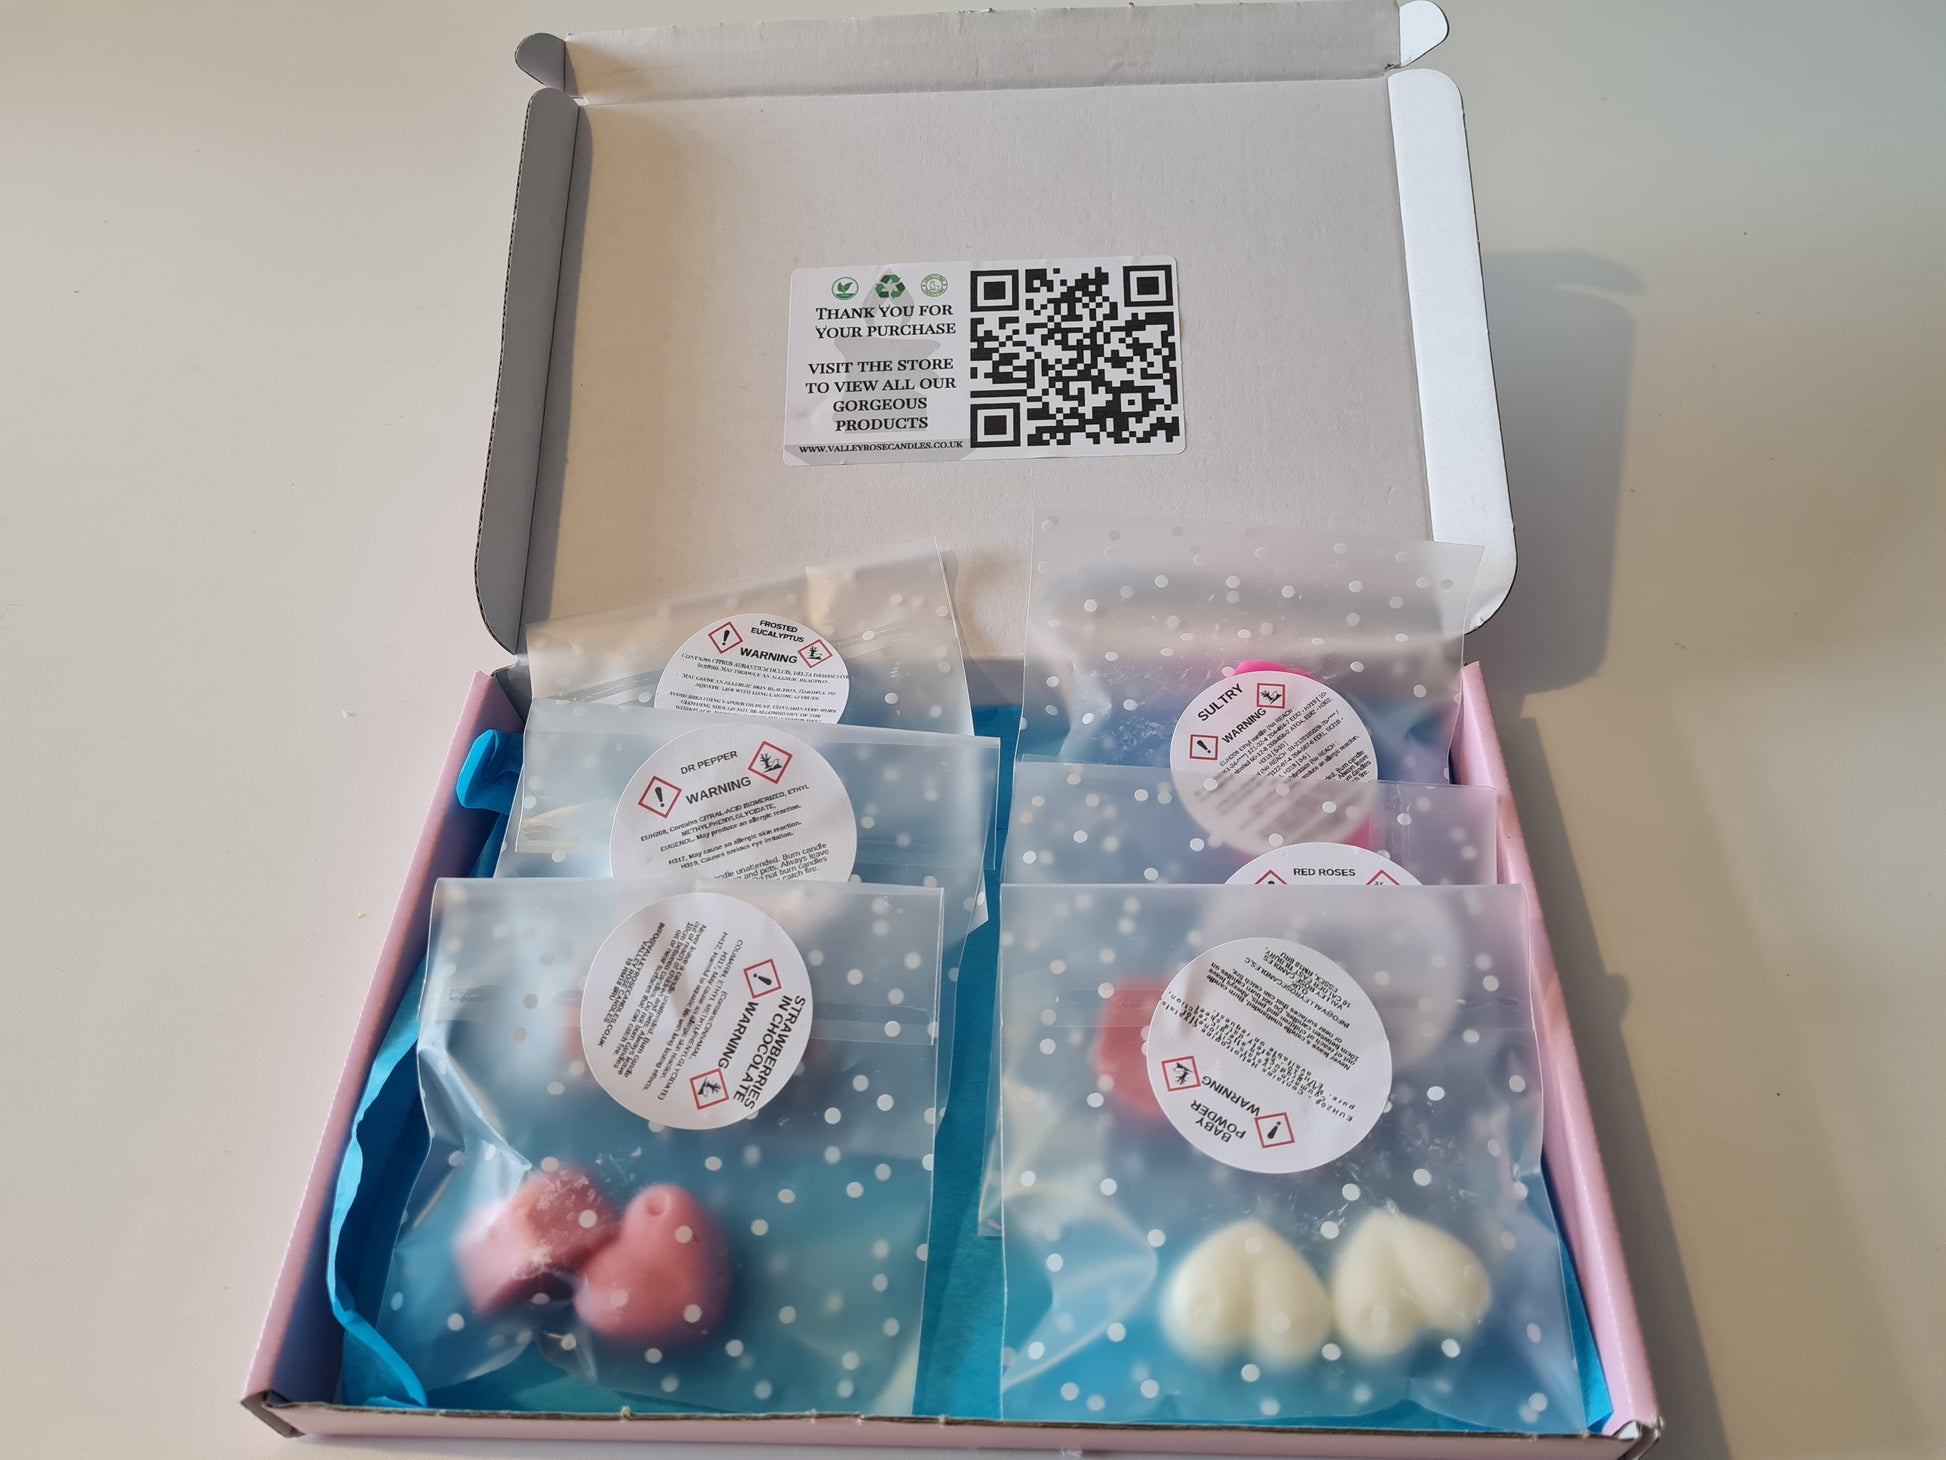 We know that all our melts smell amazing but sometimes it's difficult to decide. So you can now buy a box containing 12 mini melts from our range of scented wax melts. The box will be a lucky dip of random melts from our collection to pop in your wax melter. These sample melts are strong enough to give you several hours of great scent.